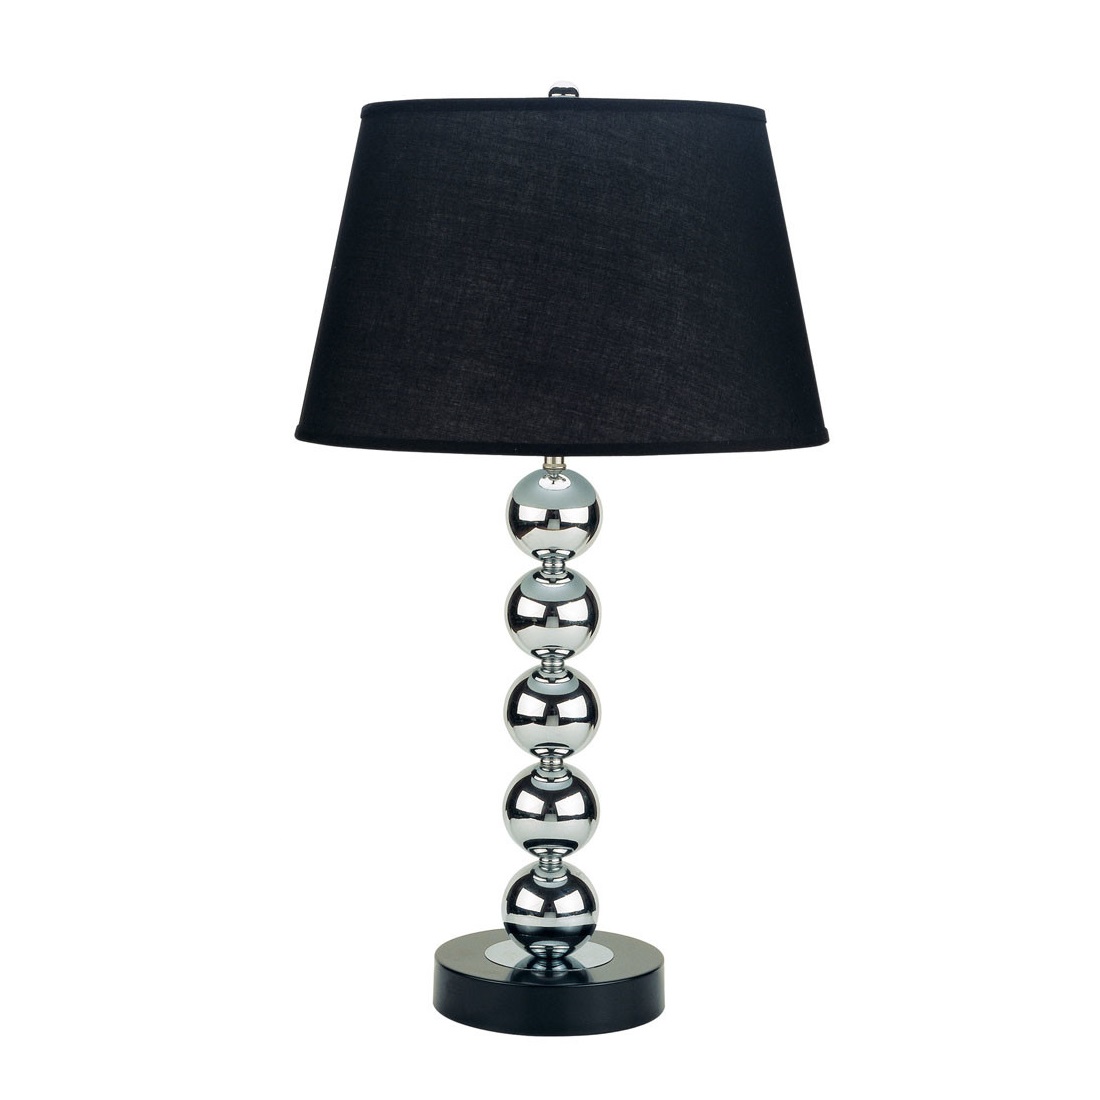 Ore Metal Modern Table Lamp With Empire Shade L Brilliant